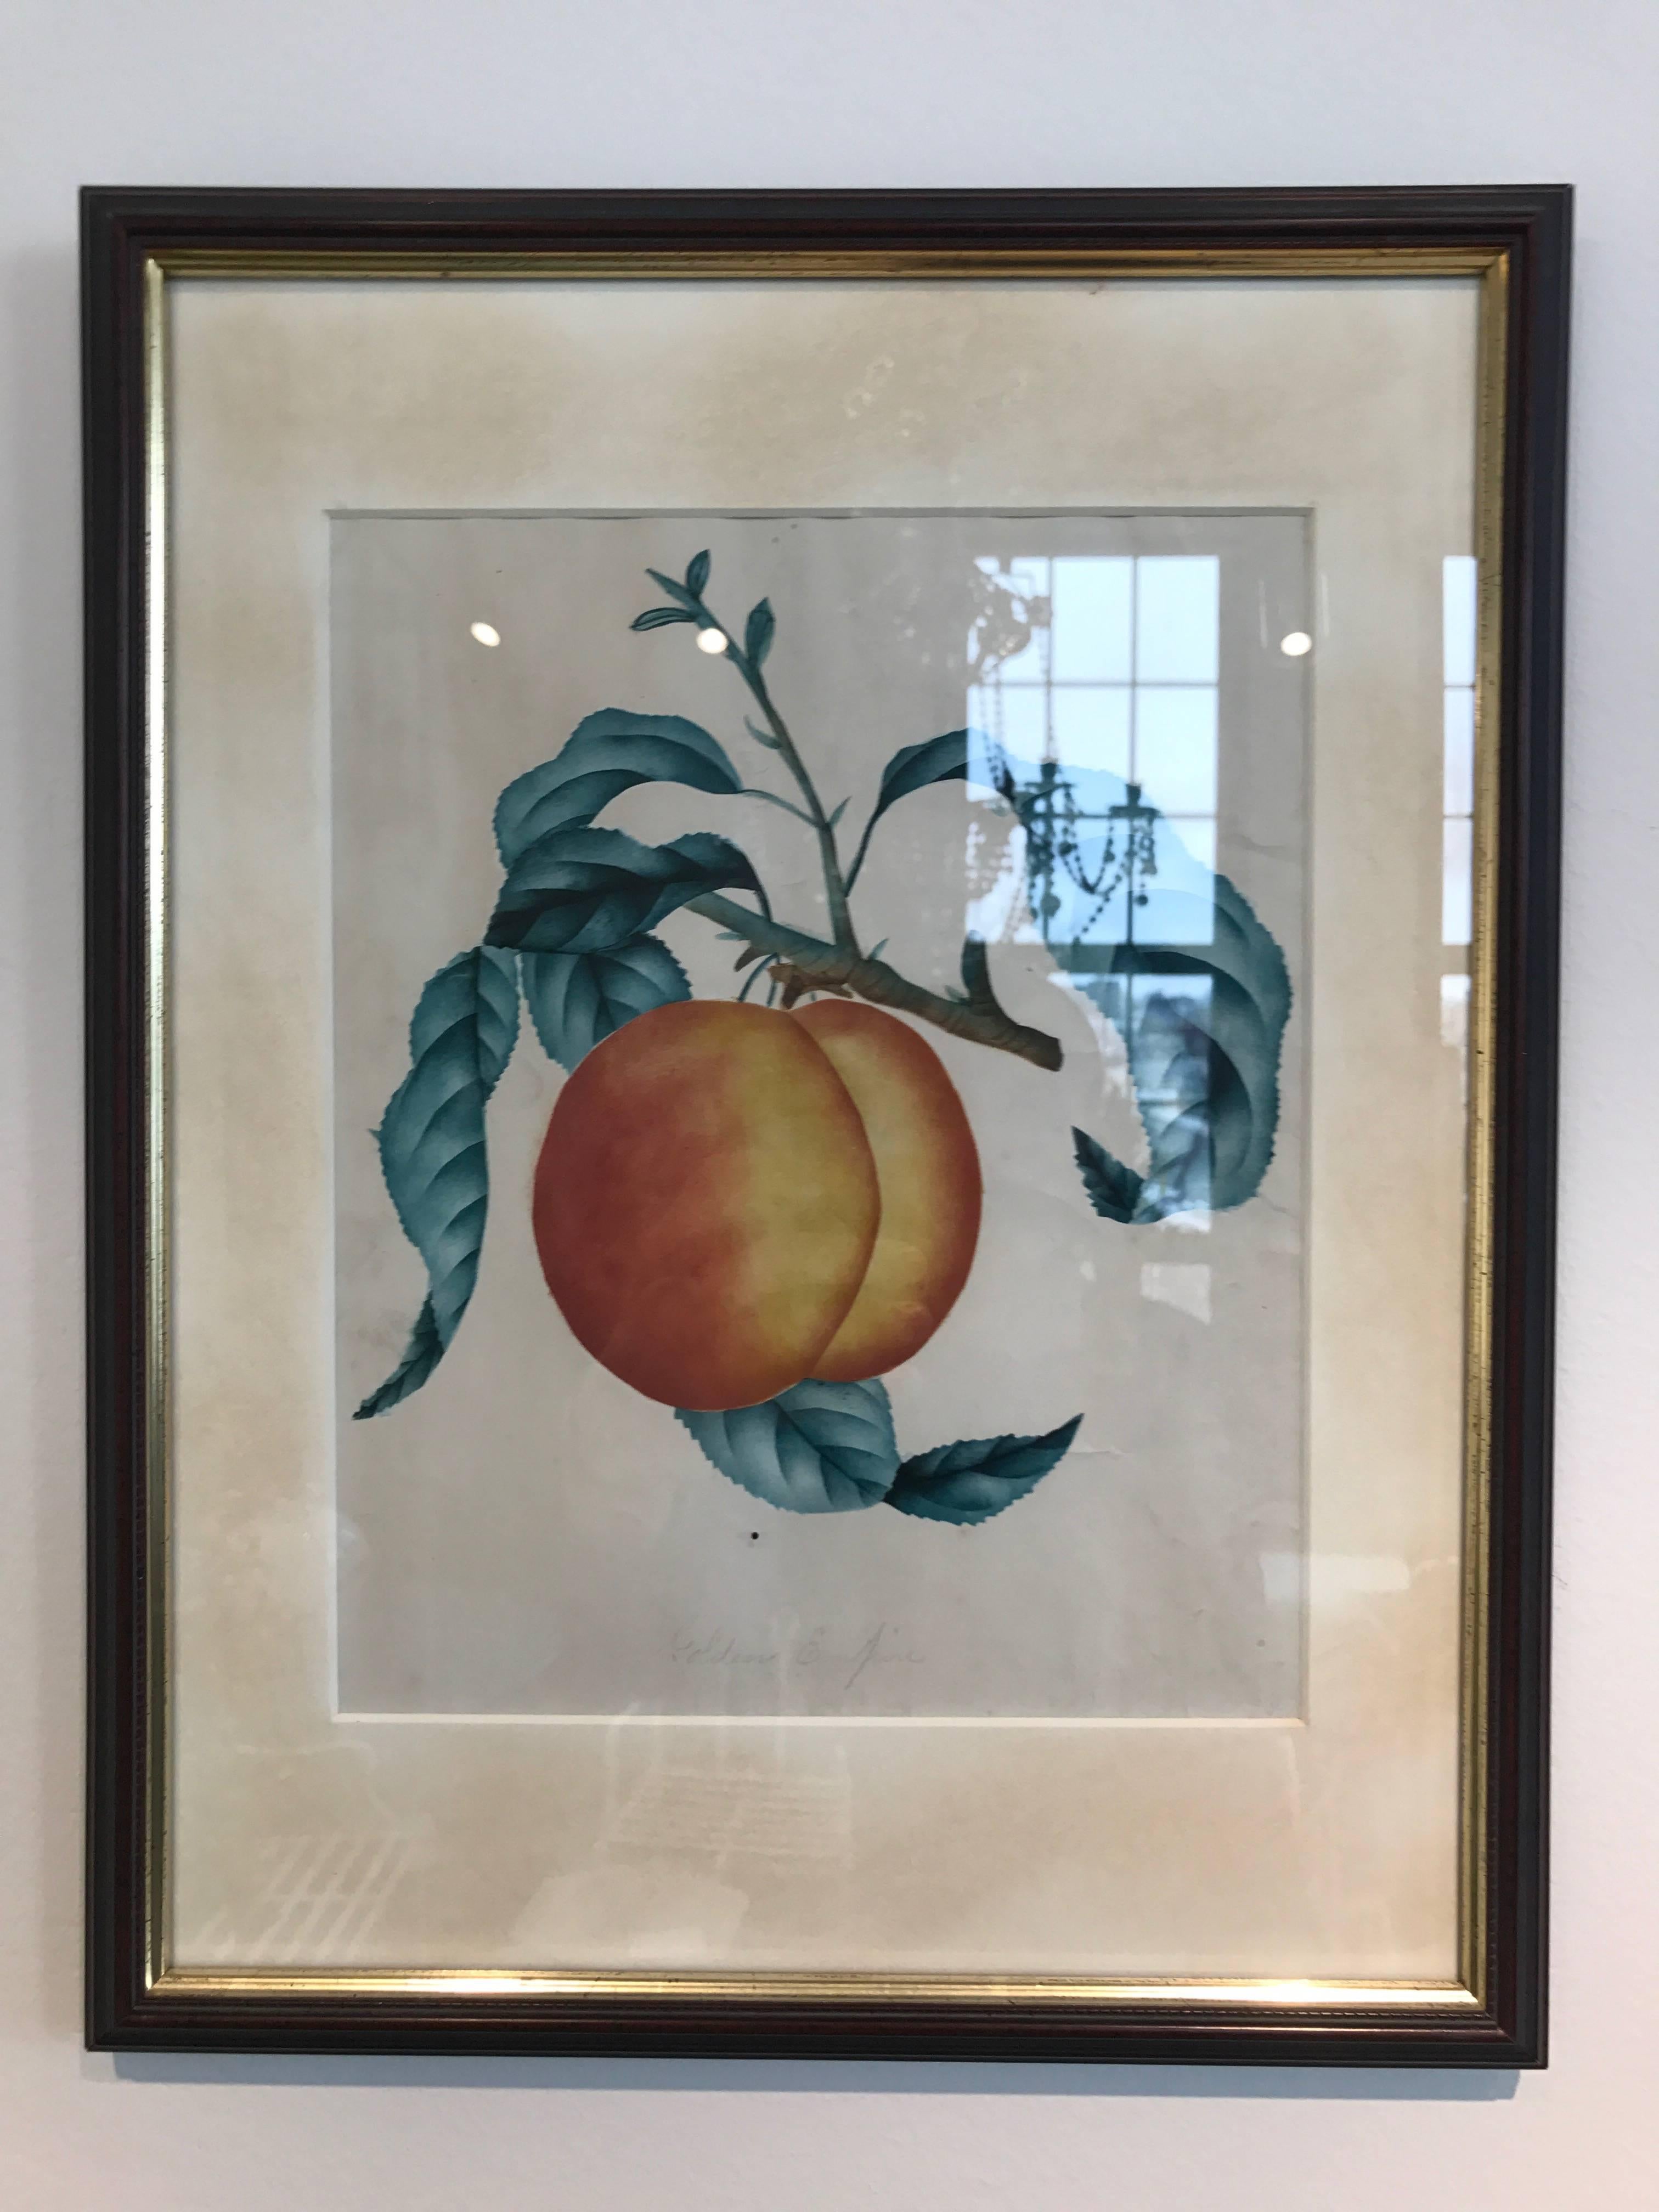 Set of 12, 19th century watercolors of fruit studies, custom matted and framed.